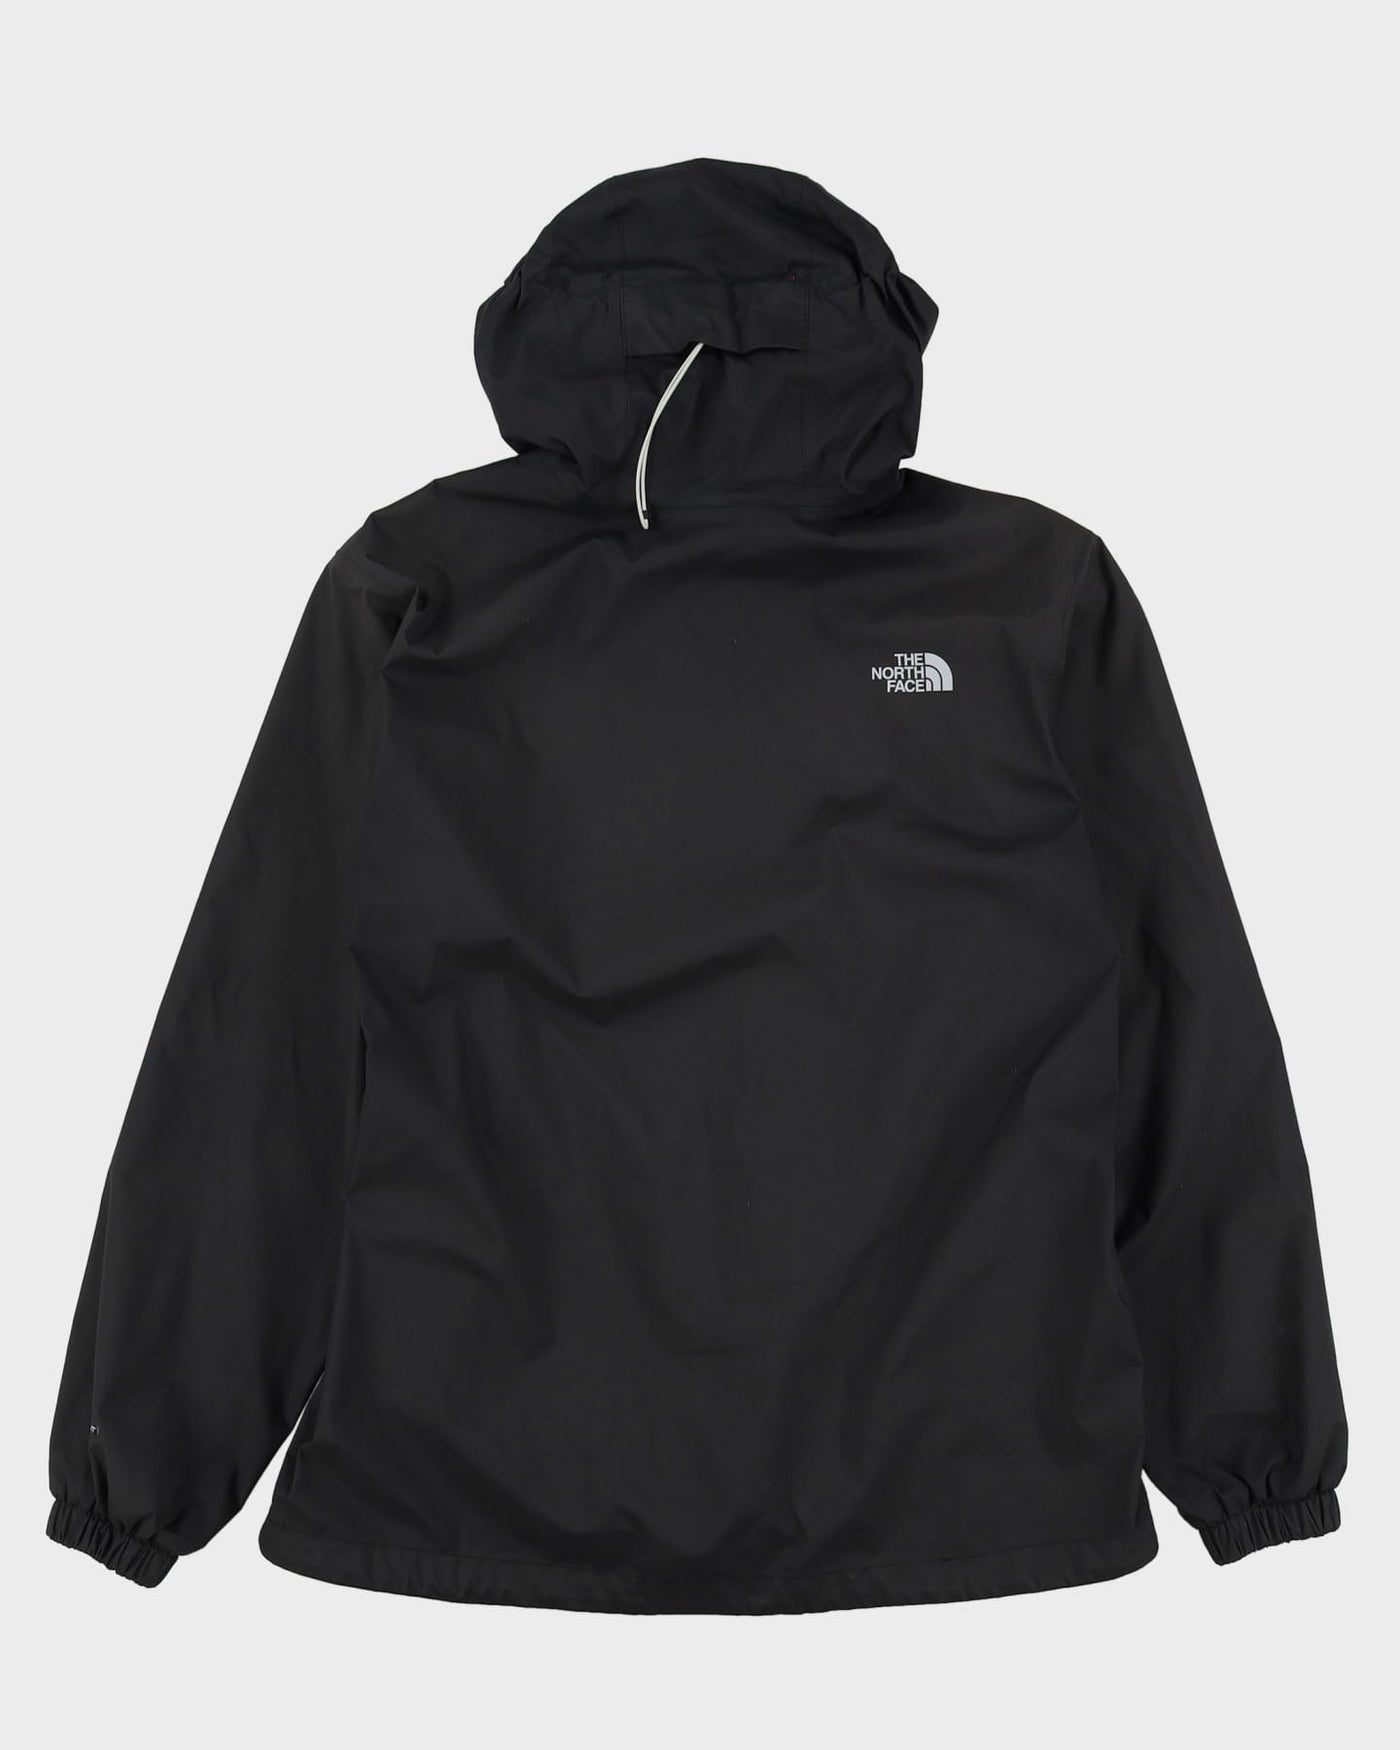 00s The North Face Black Hooded Anorak Jacket - XL